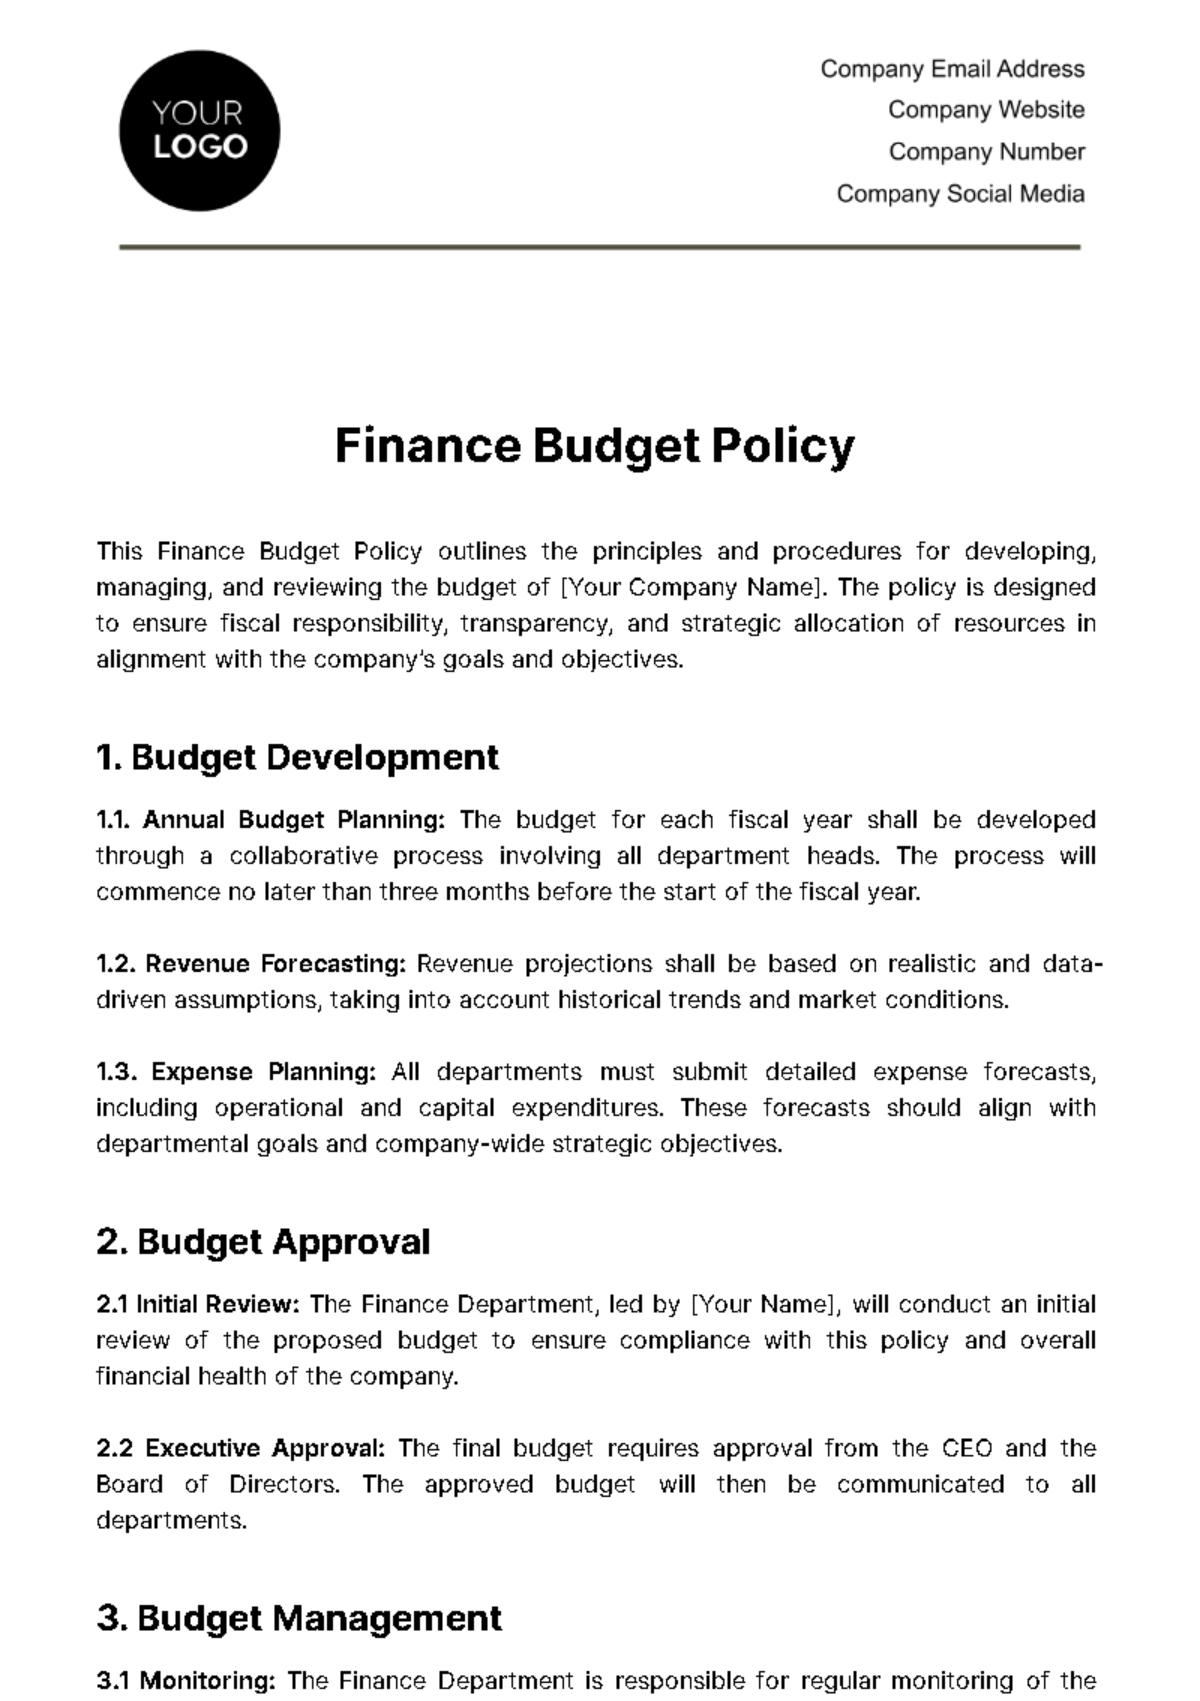 Finance Budget Policy Template